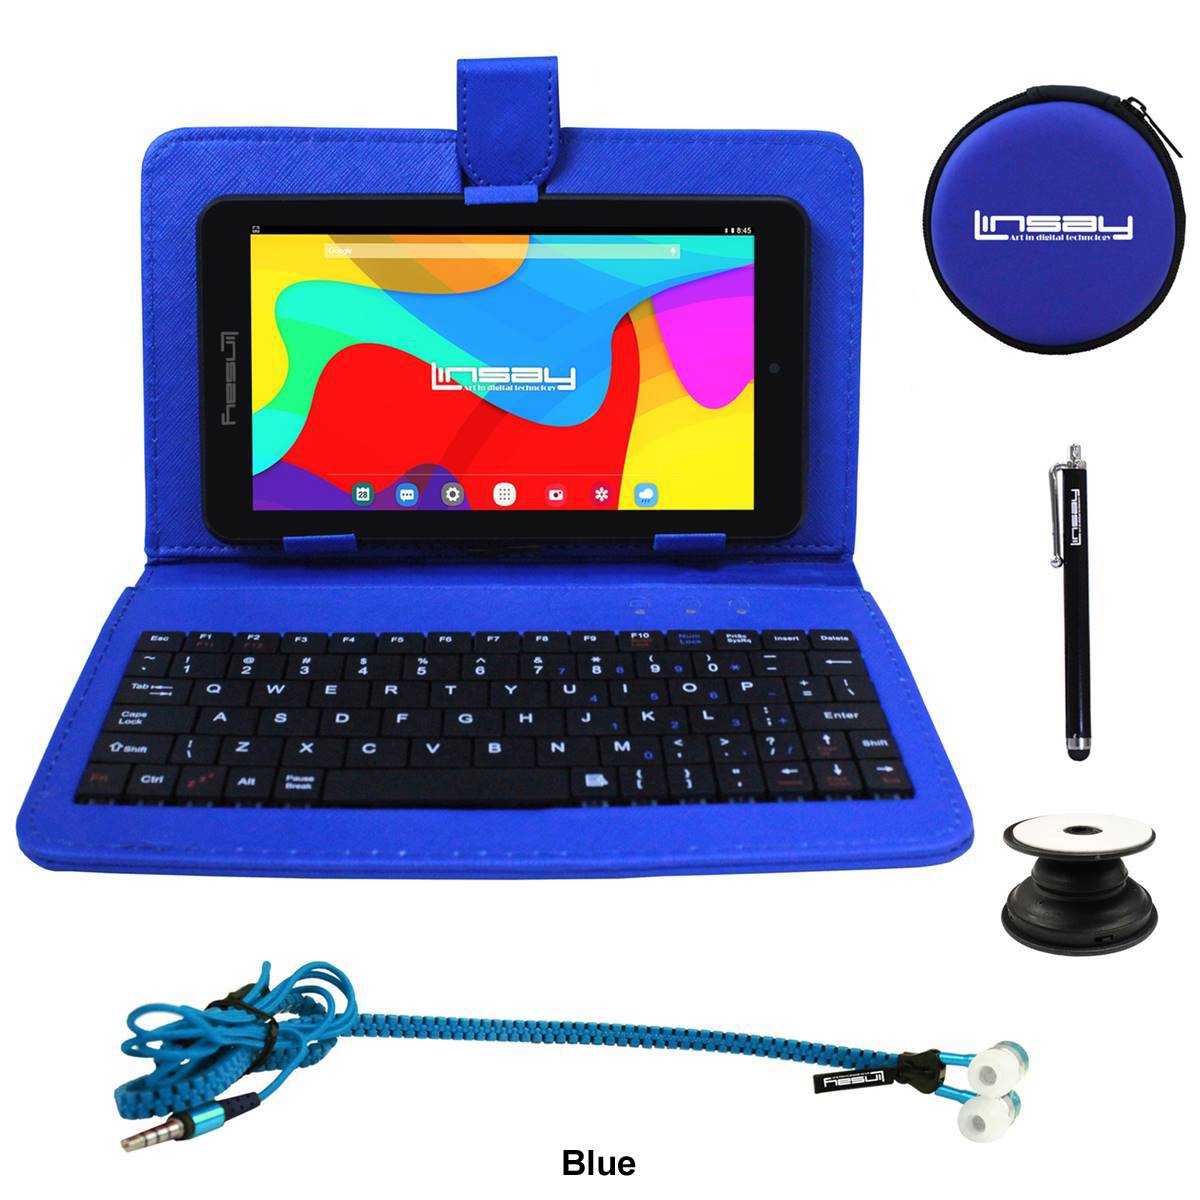 Linsay 7in. Quad Core Tablet W. Leather Keyboard And Earphones